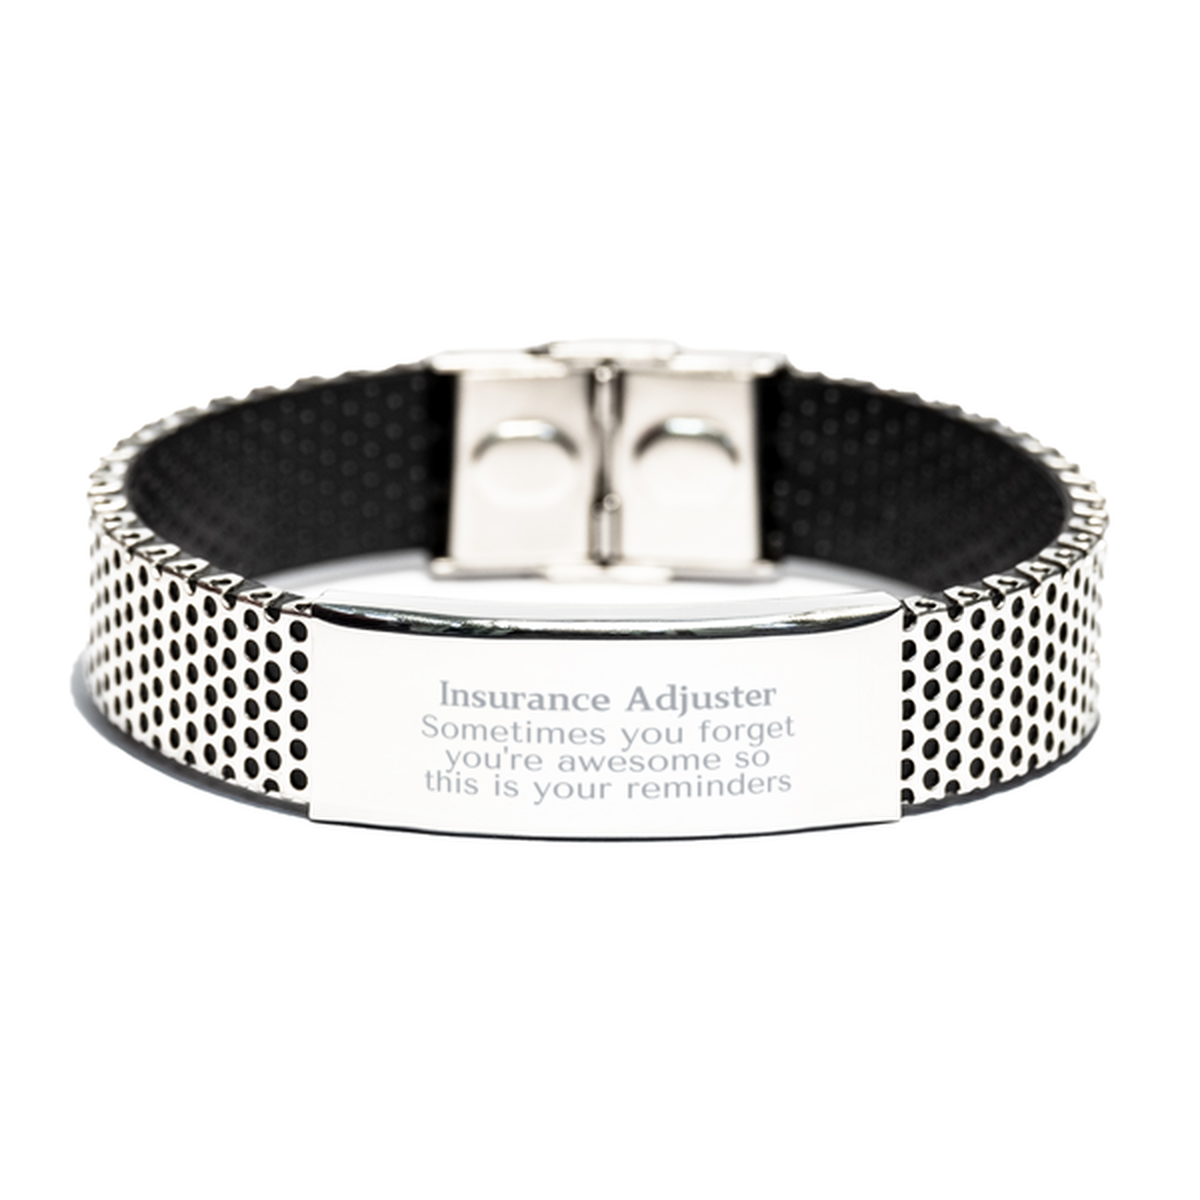 Sentimental Insurance Adjuster Stainless Steel Bracelet, Insurance Adjuster Sometimes you forget you're awesome so this is your reminders, Graduation Christmas Birthday Gifts for Insurance Adjuster, Men, Women, Coworkers